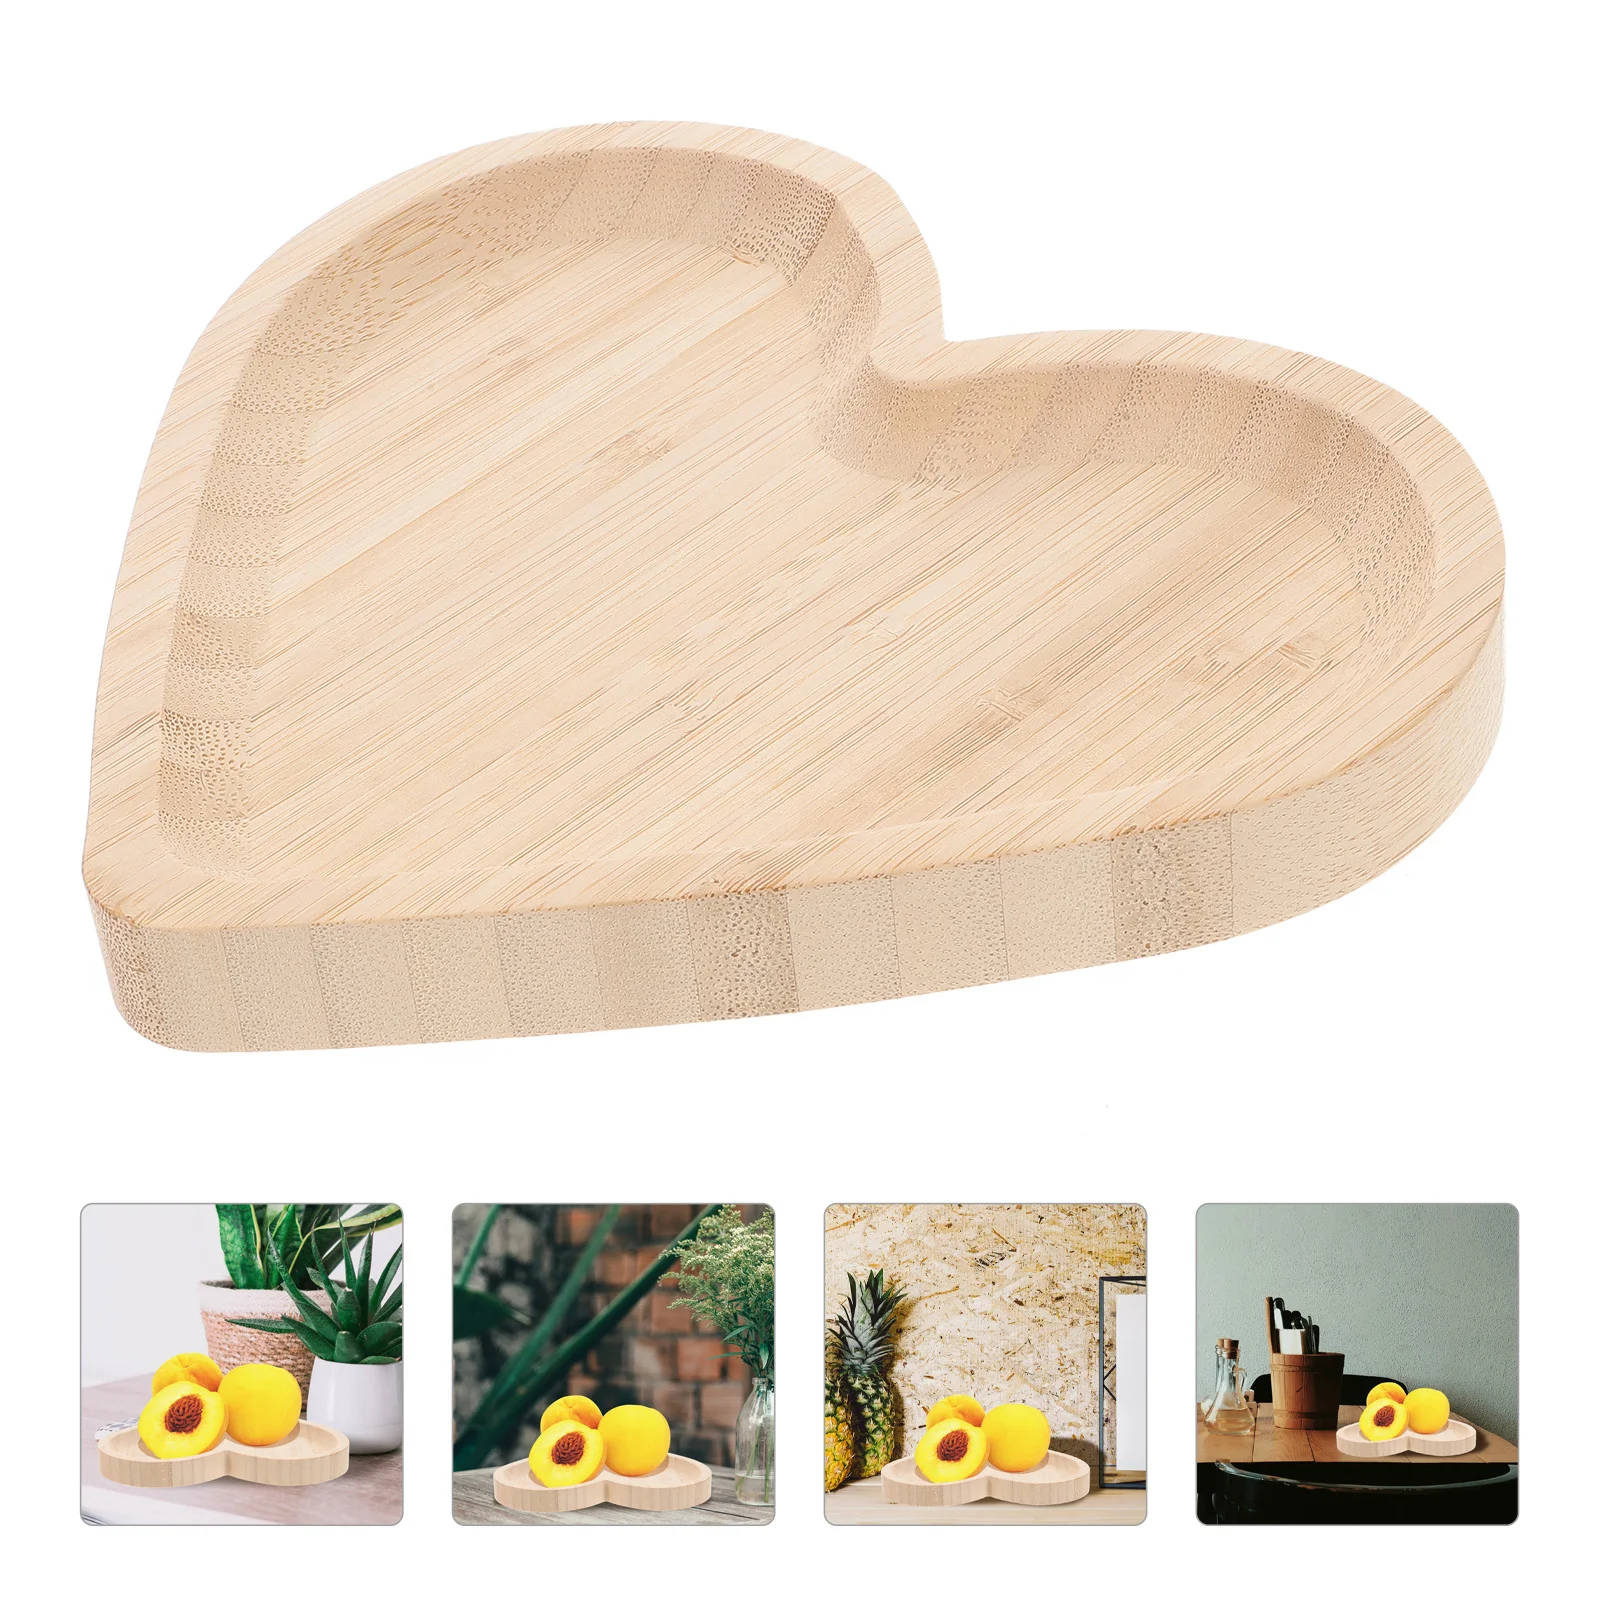 

Tray Serving Platewooden Fruits Platters Fruit Bread Appetizer Heart Desktop Dishes Storage Dried Dessert Dish Snacks Nut Candy